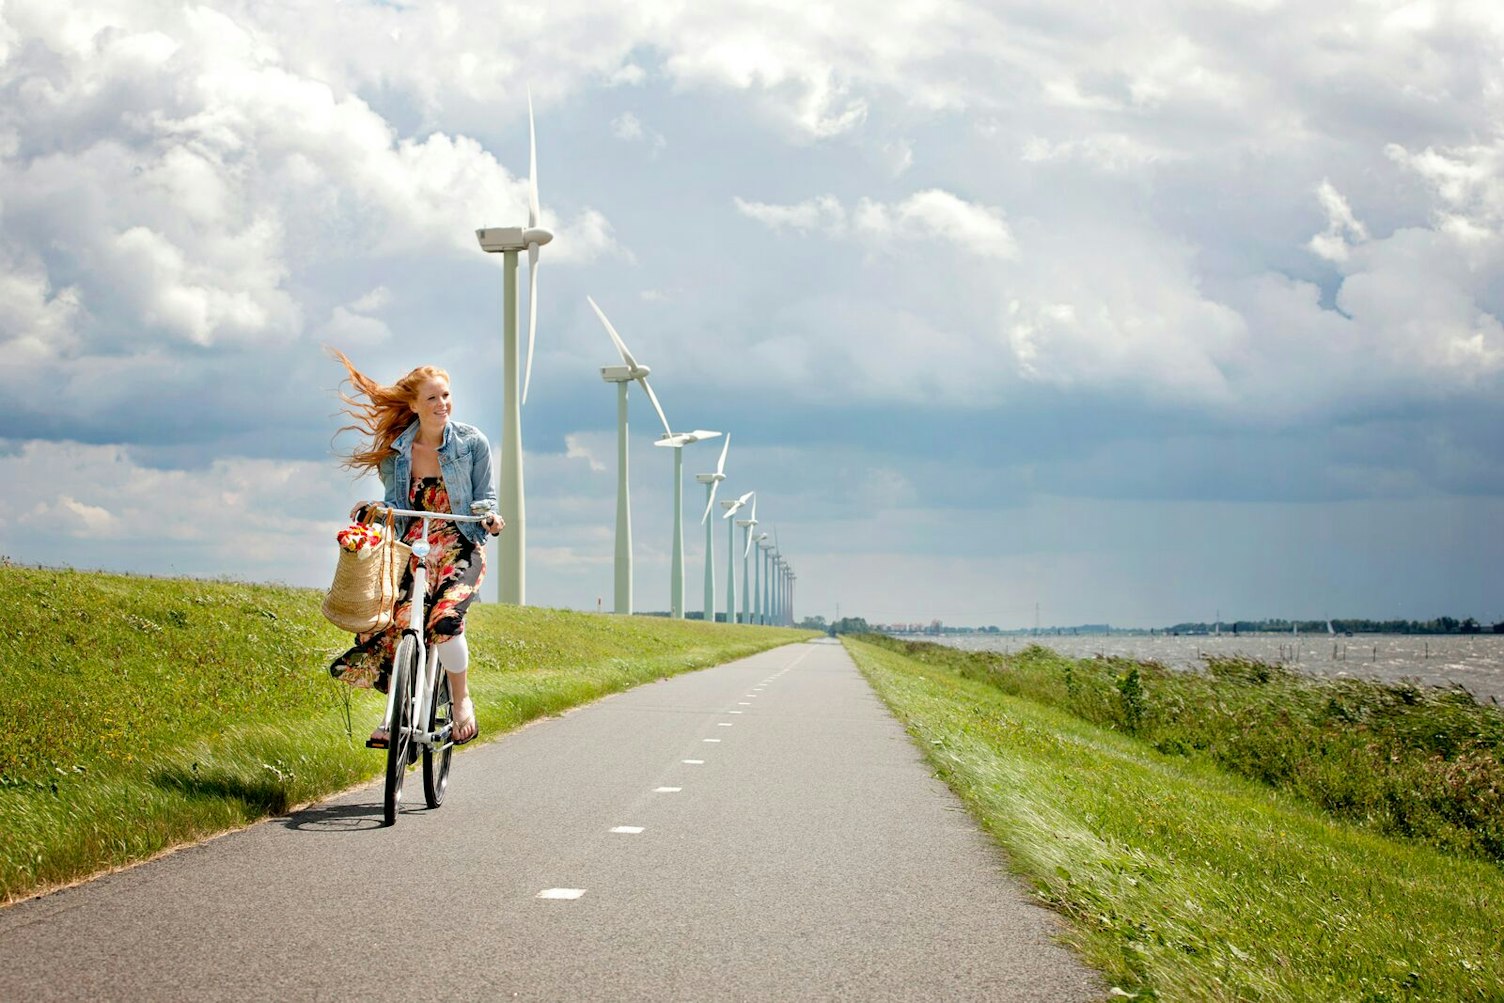 Young Woman Cycling on a Road Passing a Wind Farm